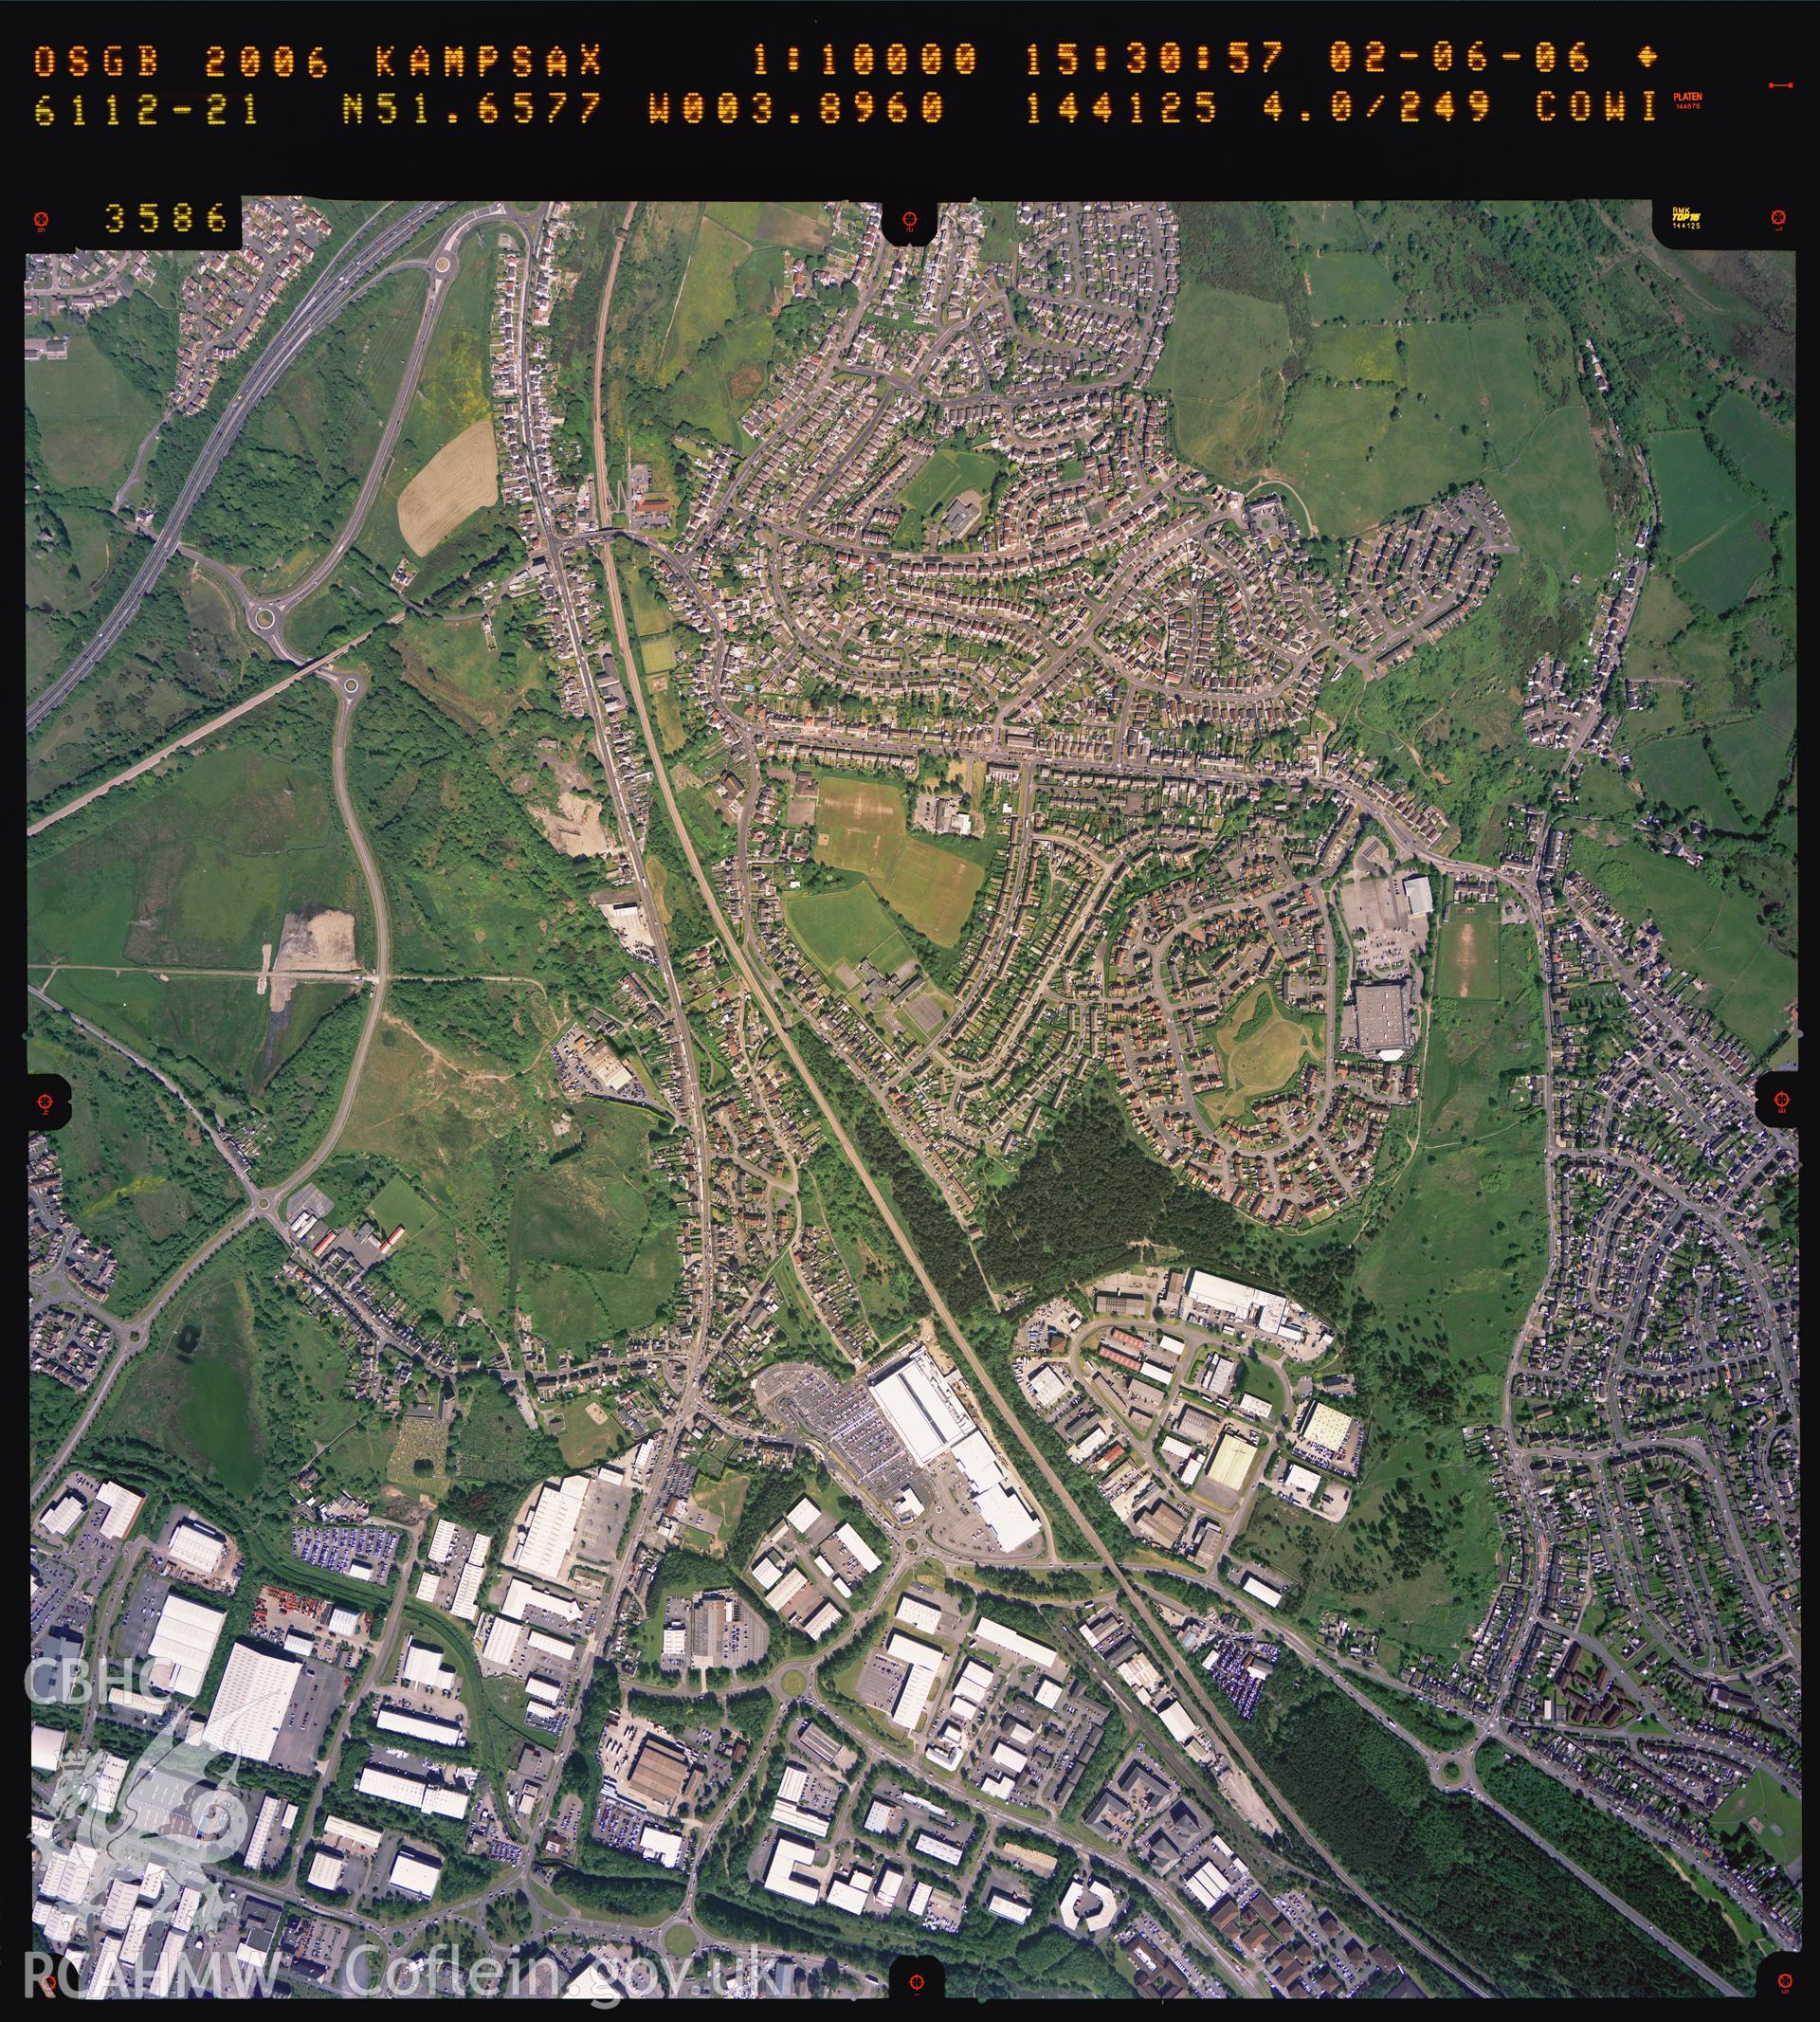 Digitized copy of a colour aerial photograph showing the Winsh-wen area, Swansea, taken by Ordnance Survey, 2006.